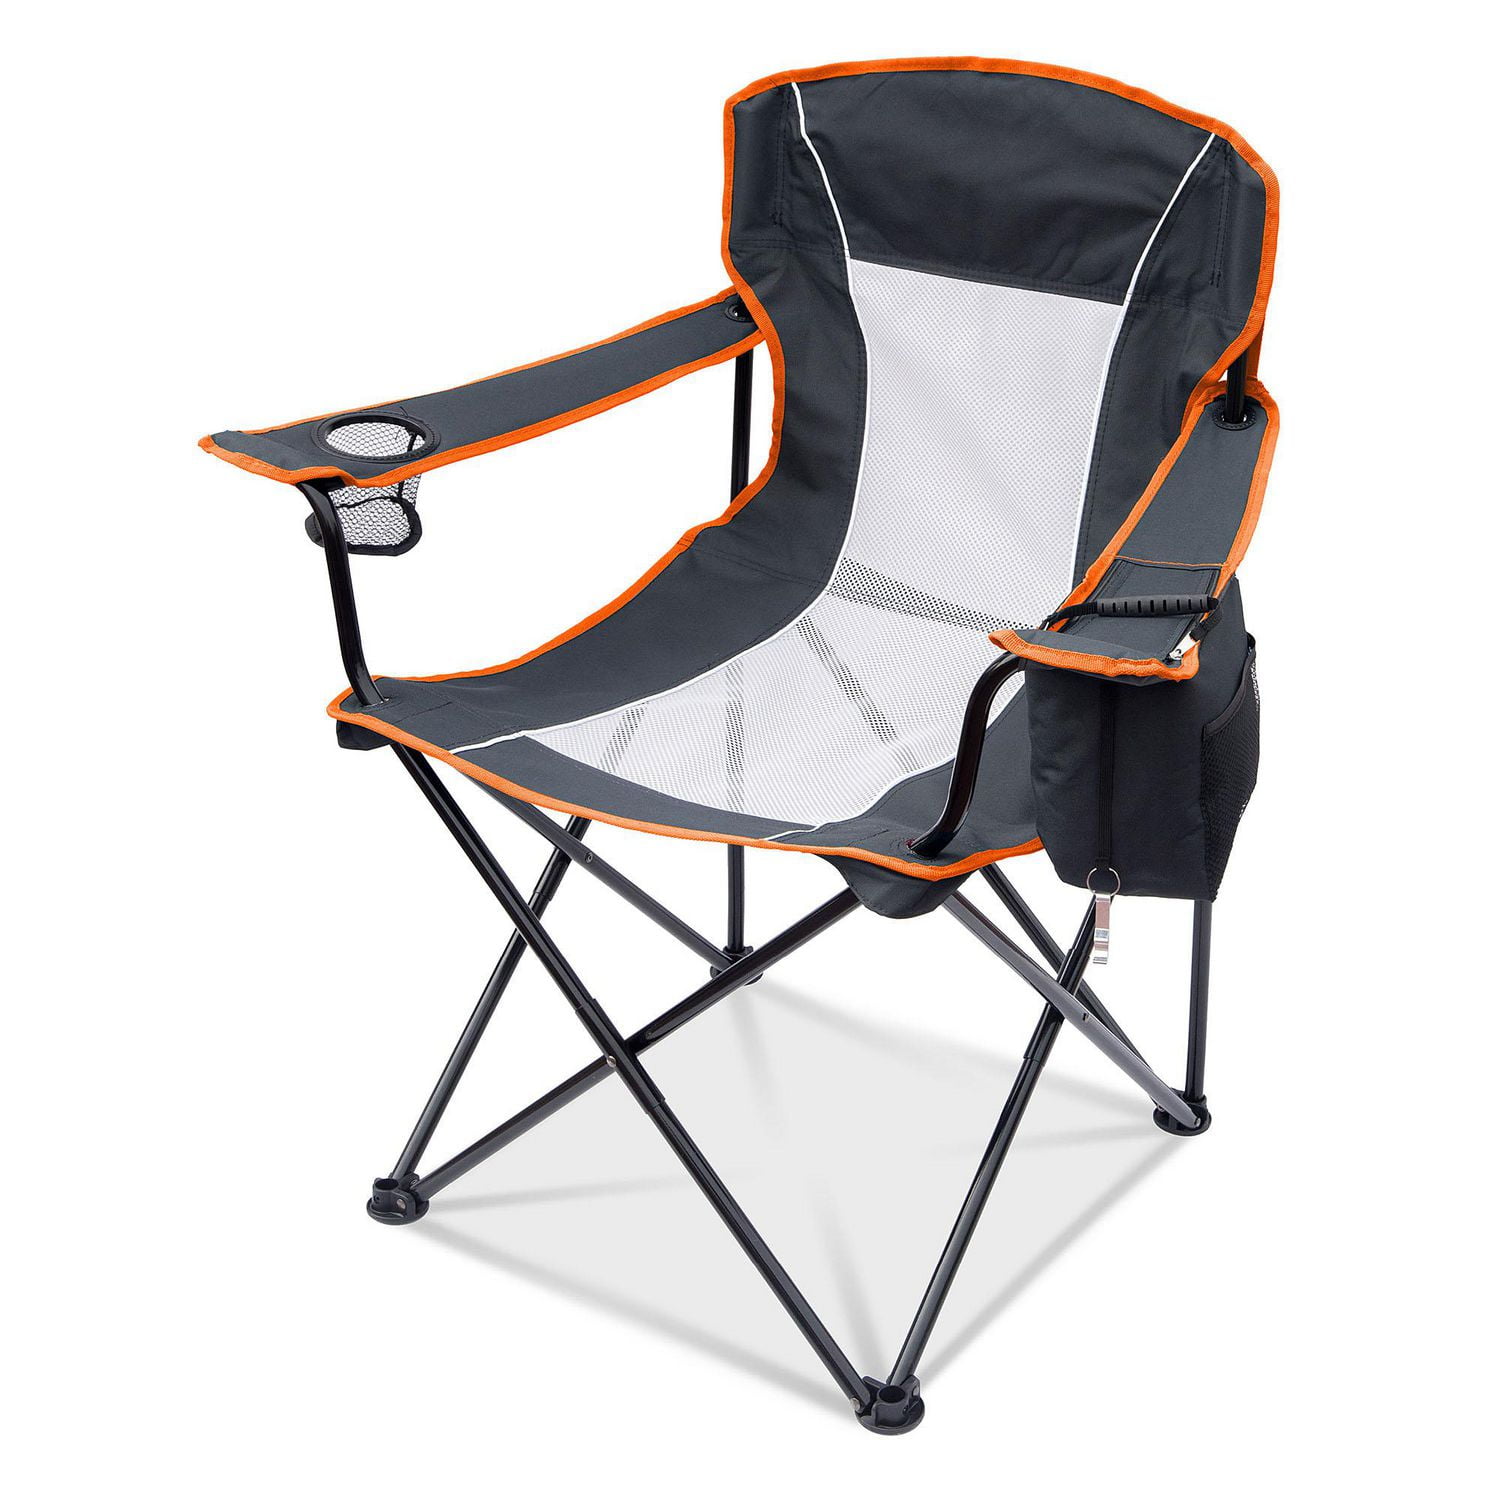 Ozark Trail Oversized Mesh Camp Chair with Cooler, Blue/Aqua and Grey, Adult